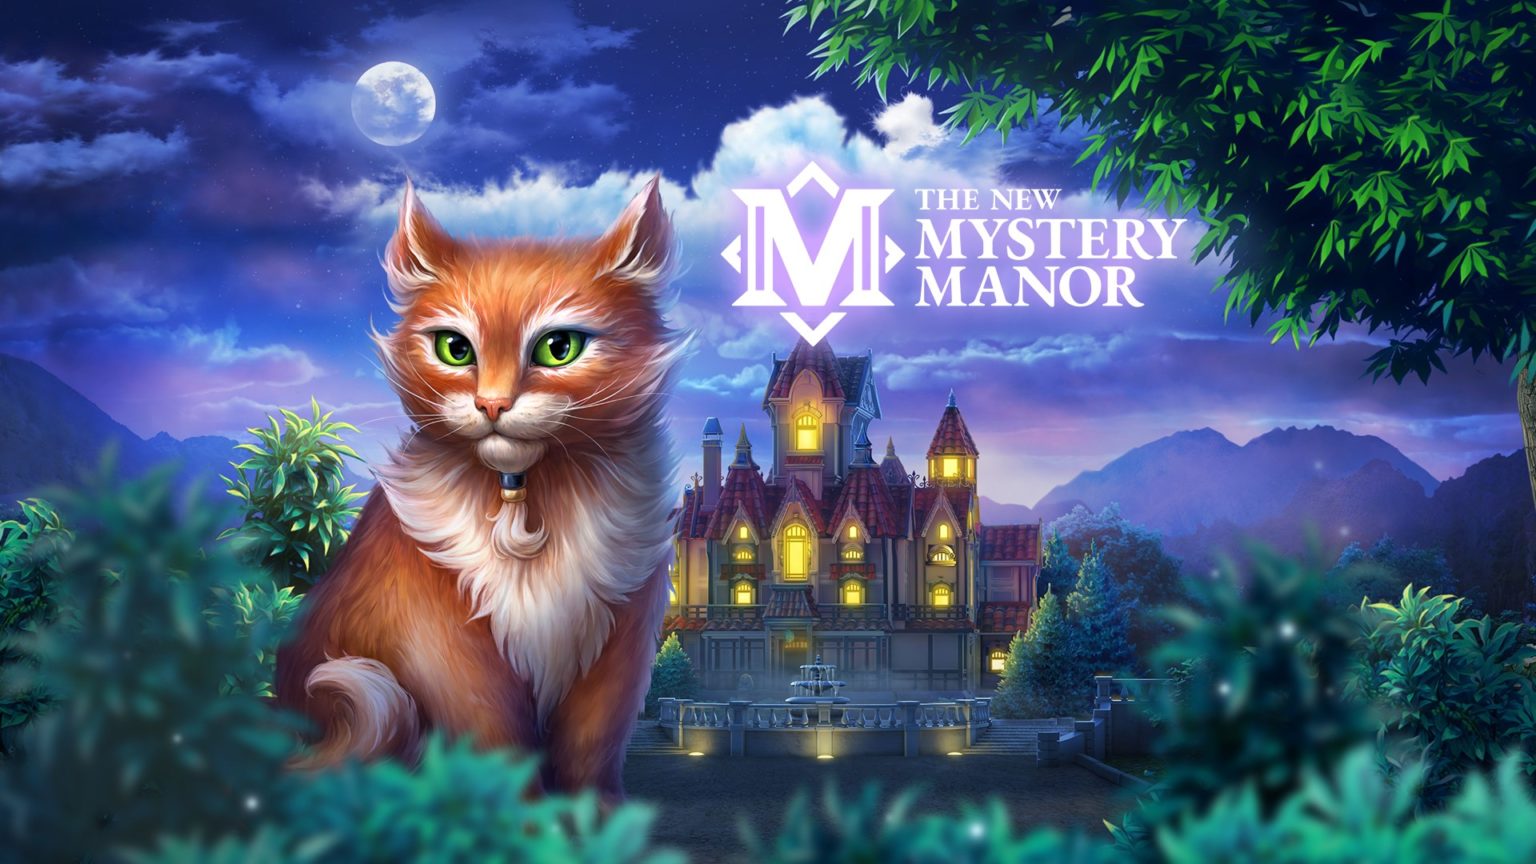 manor matters play online